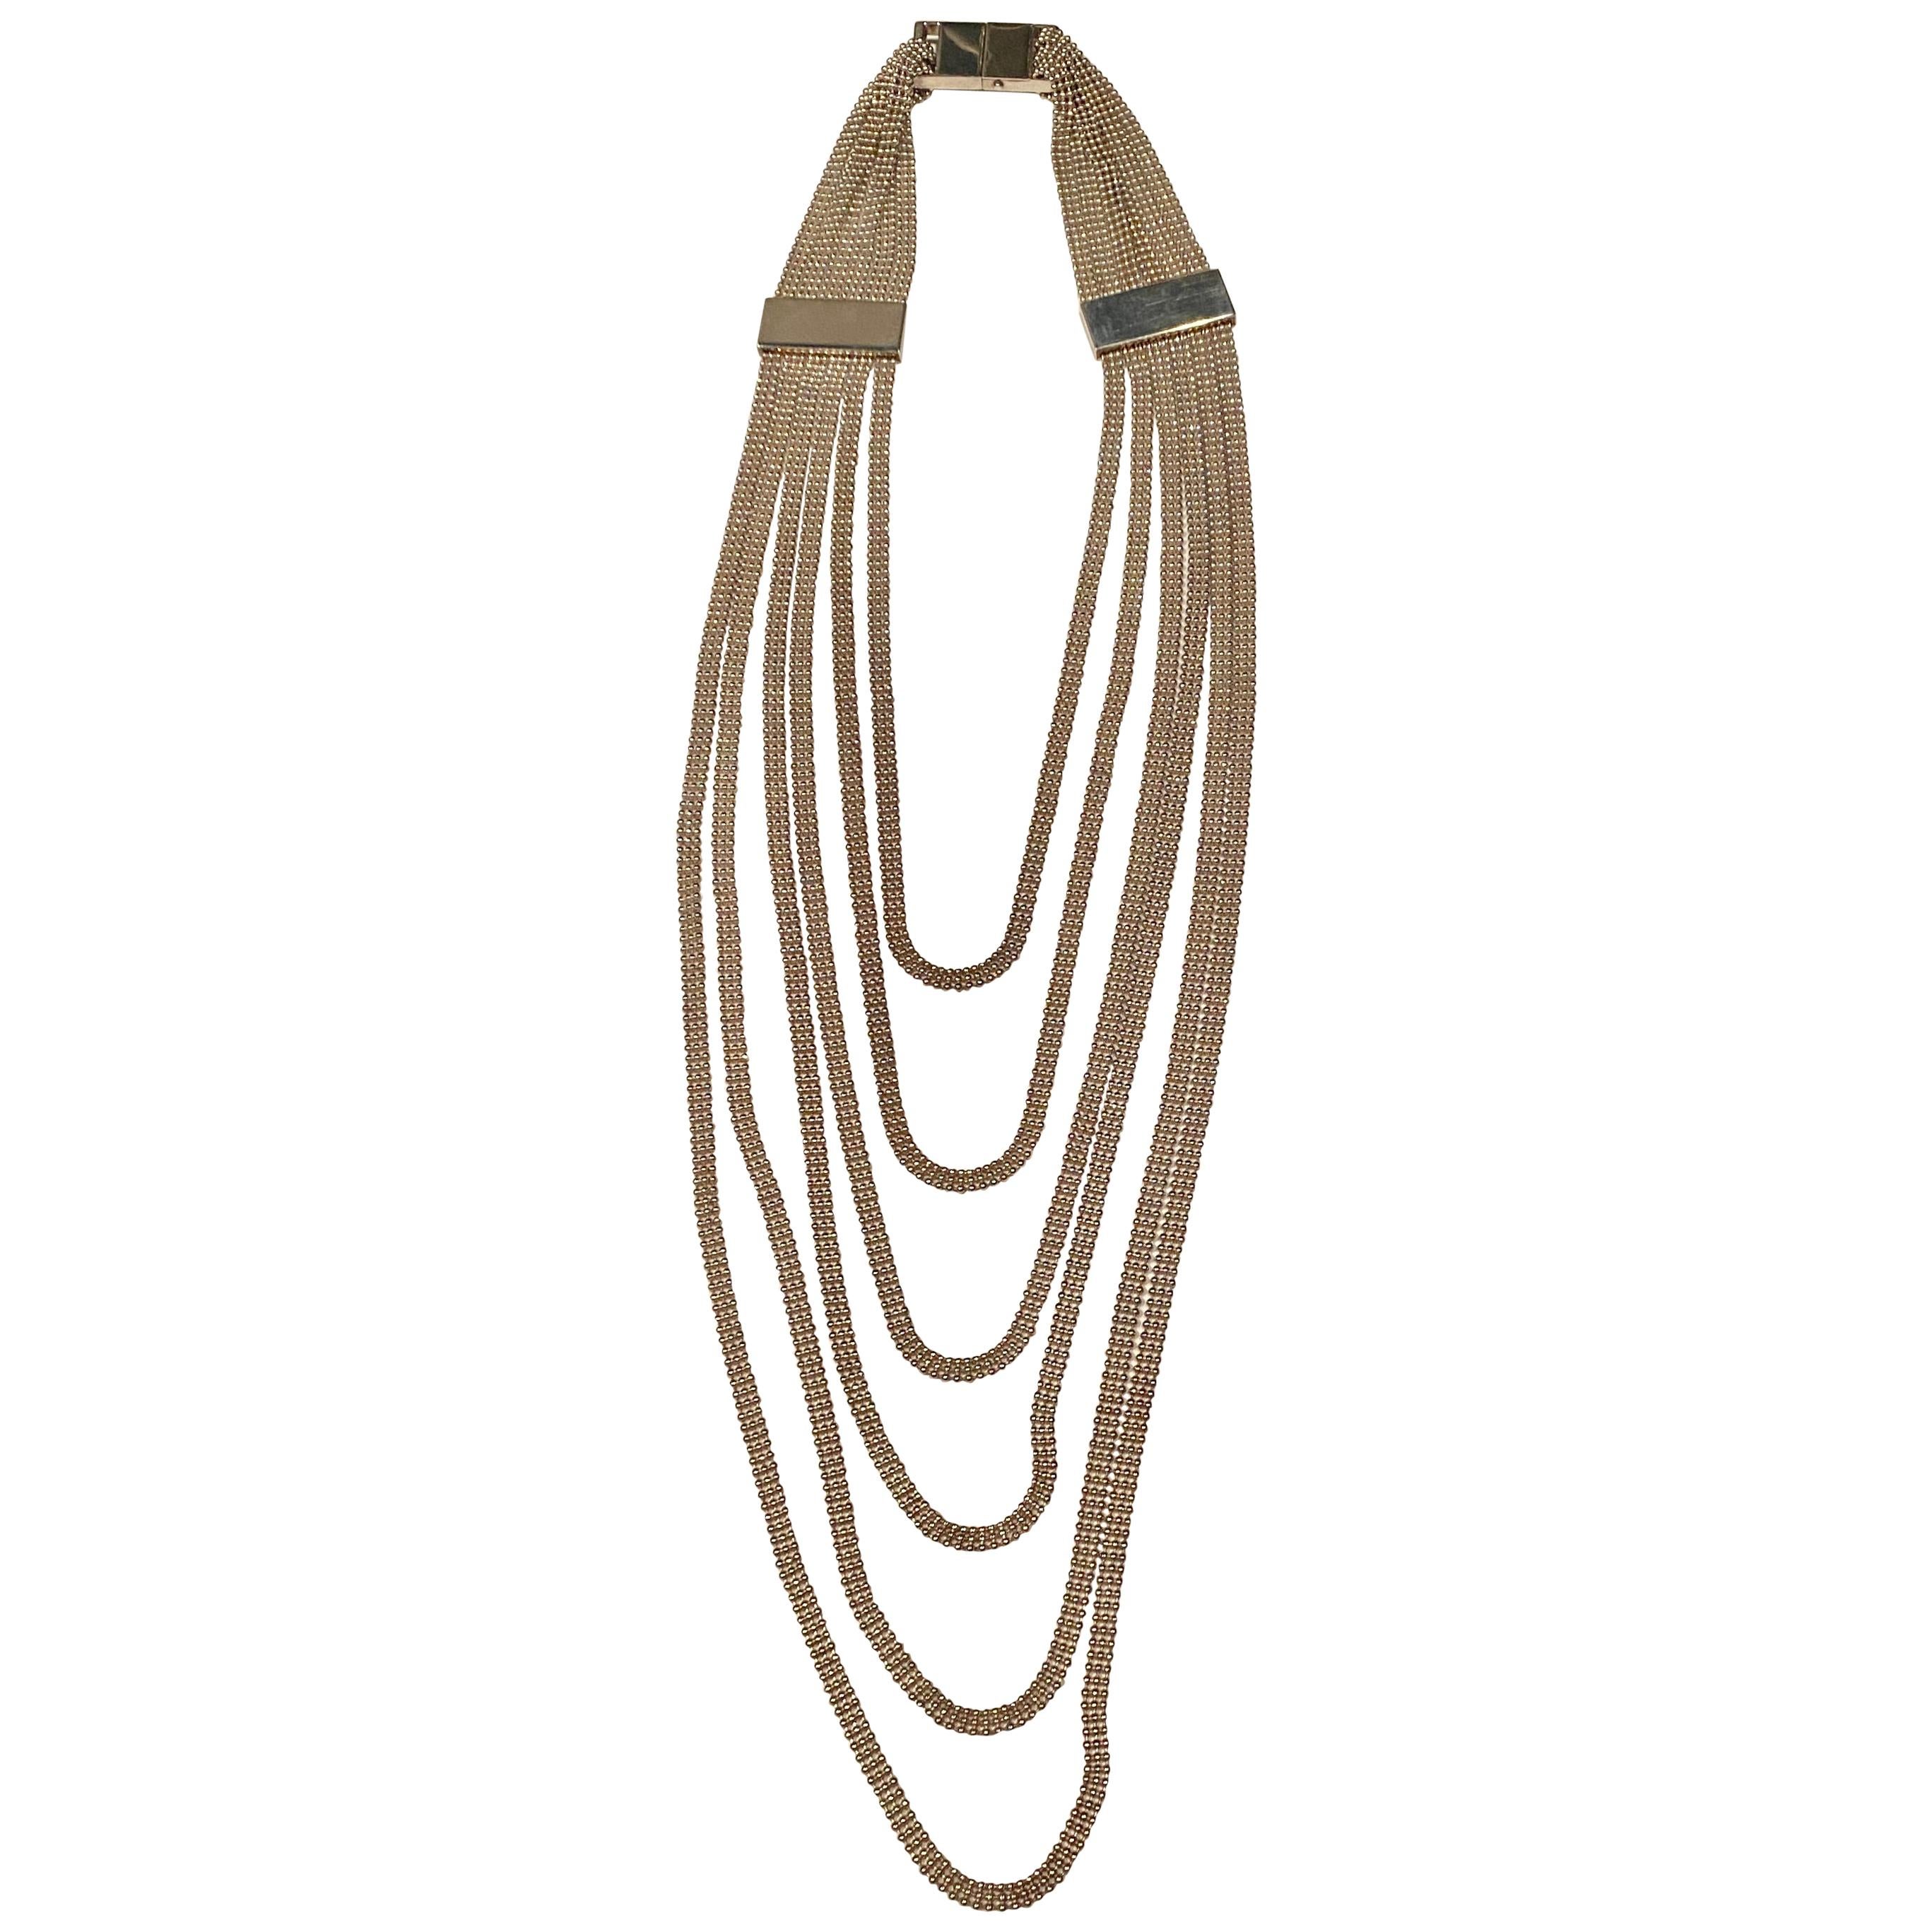 Adeline Cacheux "Perles Fluidity" Six-Strand Necklace by Christofle